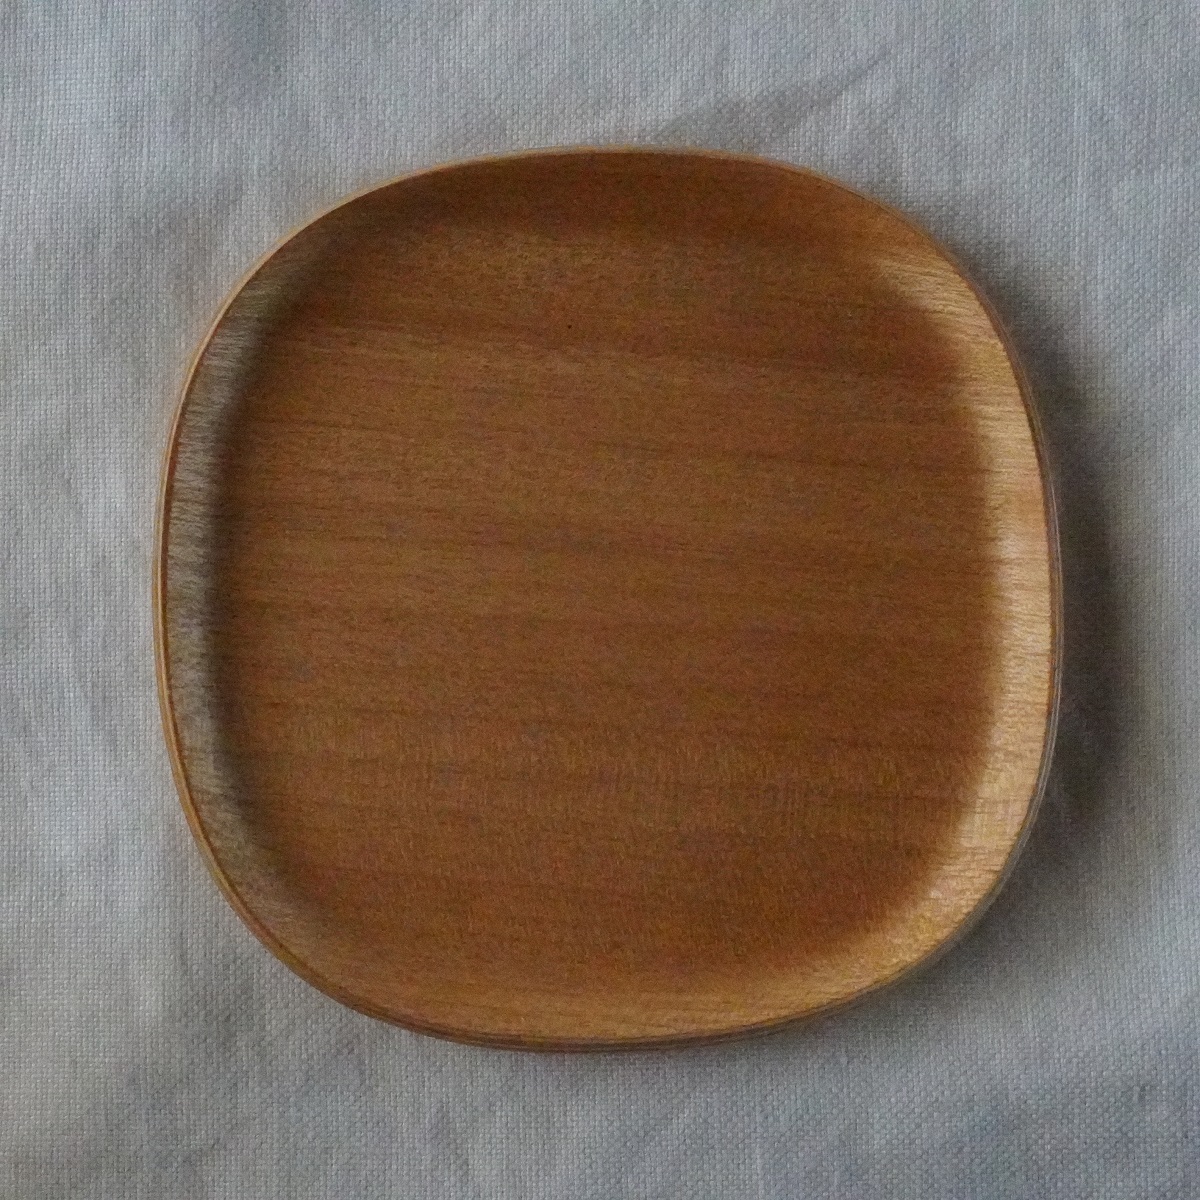  nonslip saucer Coaster tray natural tree UNITEA Maple 125×125mm KINTO click post including in a package possibility 